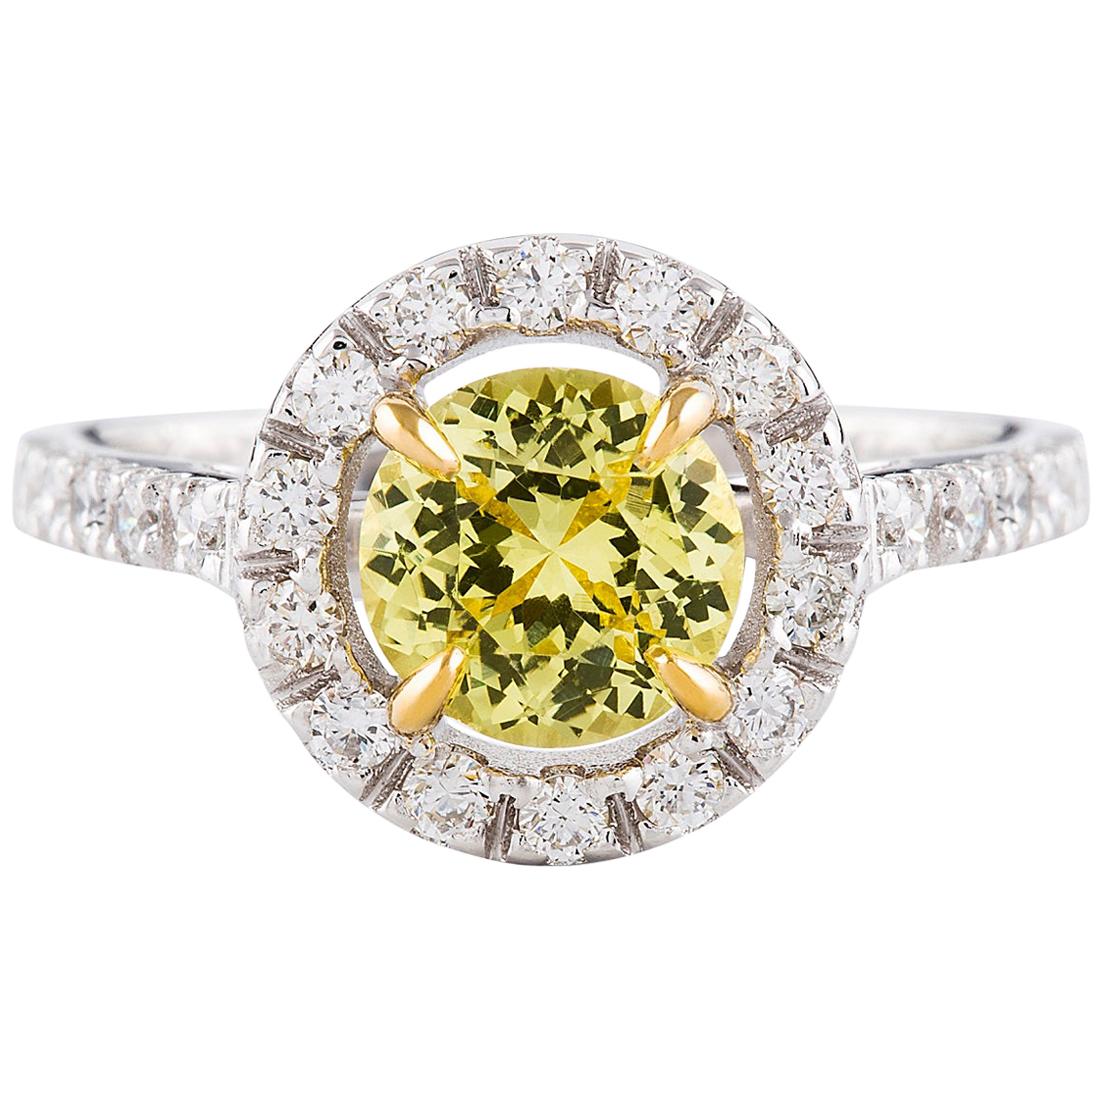 1.33 Carat Round Yellow Sapphire and Diamond Cluster Ring in 18 Carat Gold